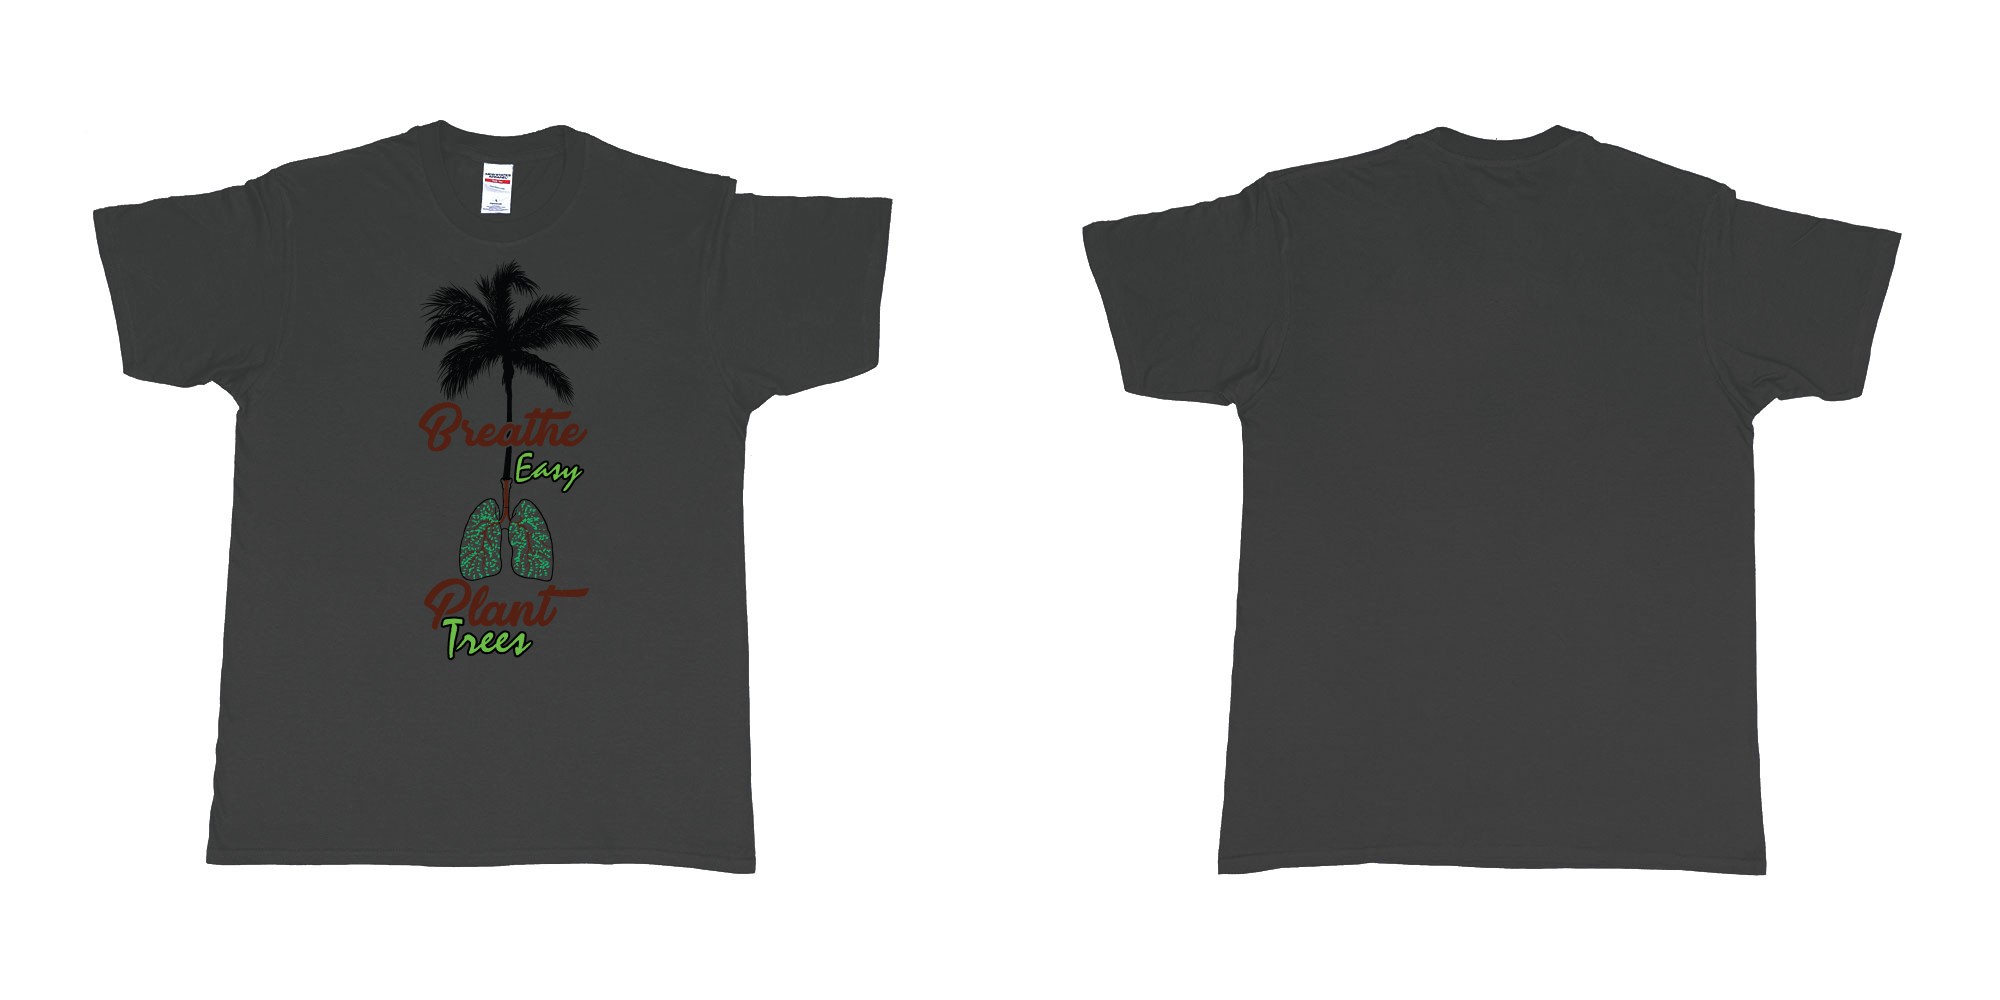 Custom tshirt design breathe easy and plant a tree for better air for everyone in fabric color black choice your own text made in Bali by The Pirate Way